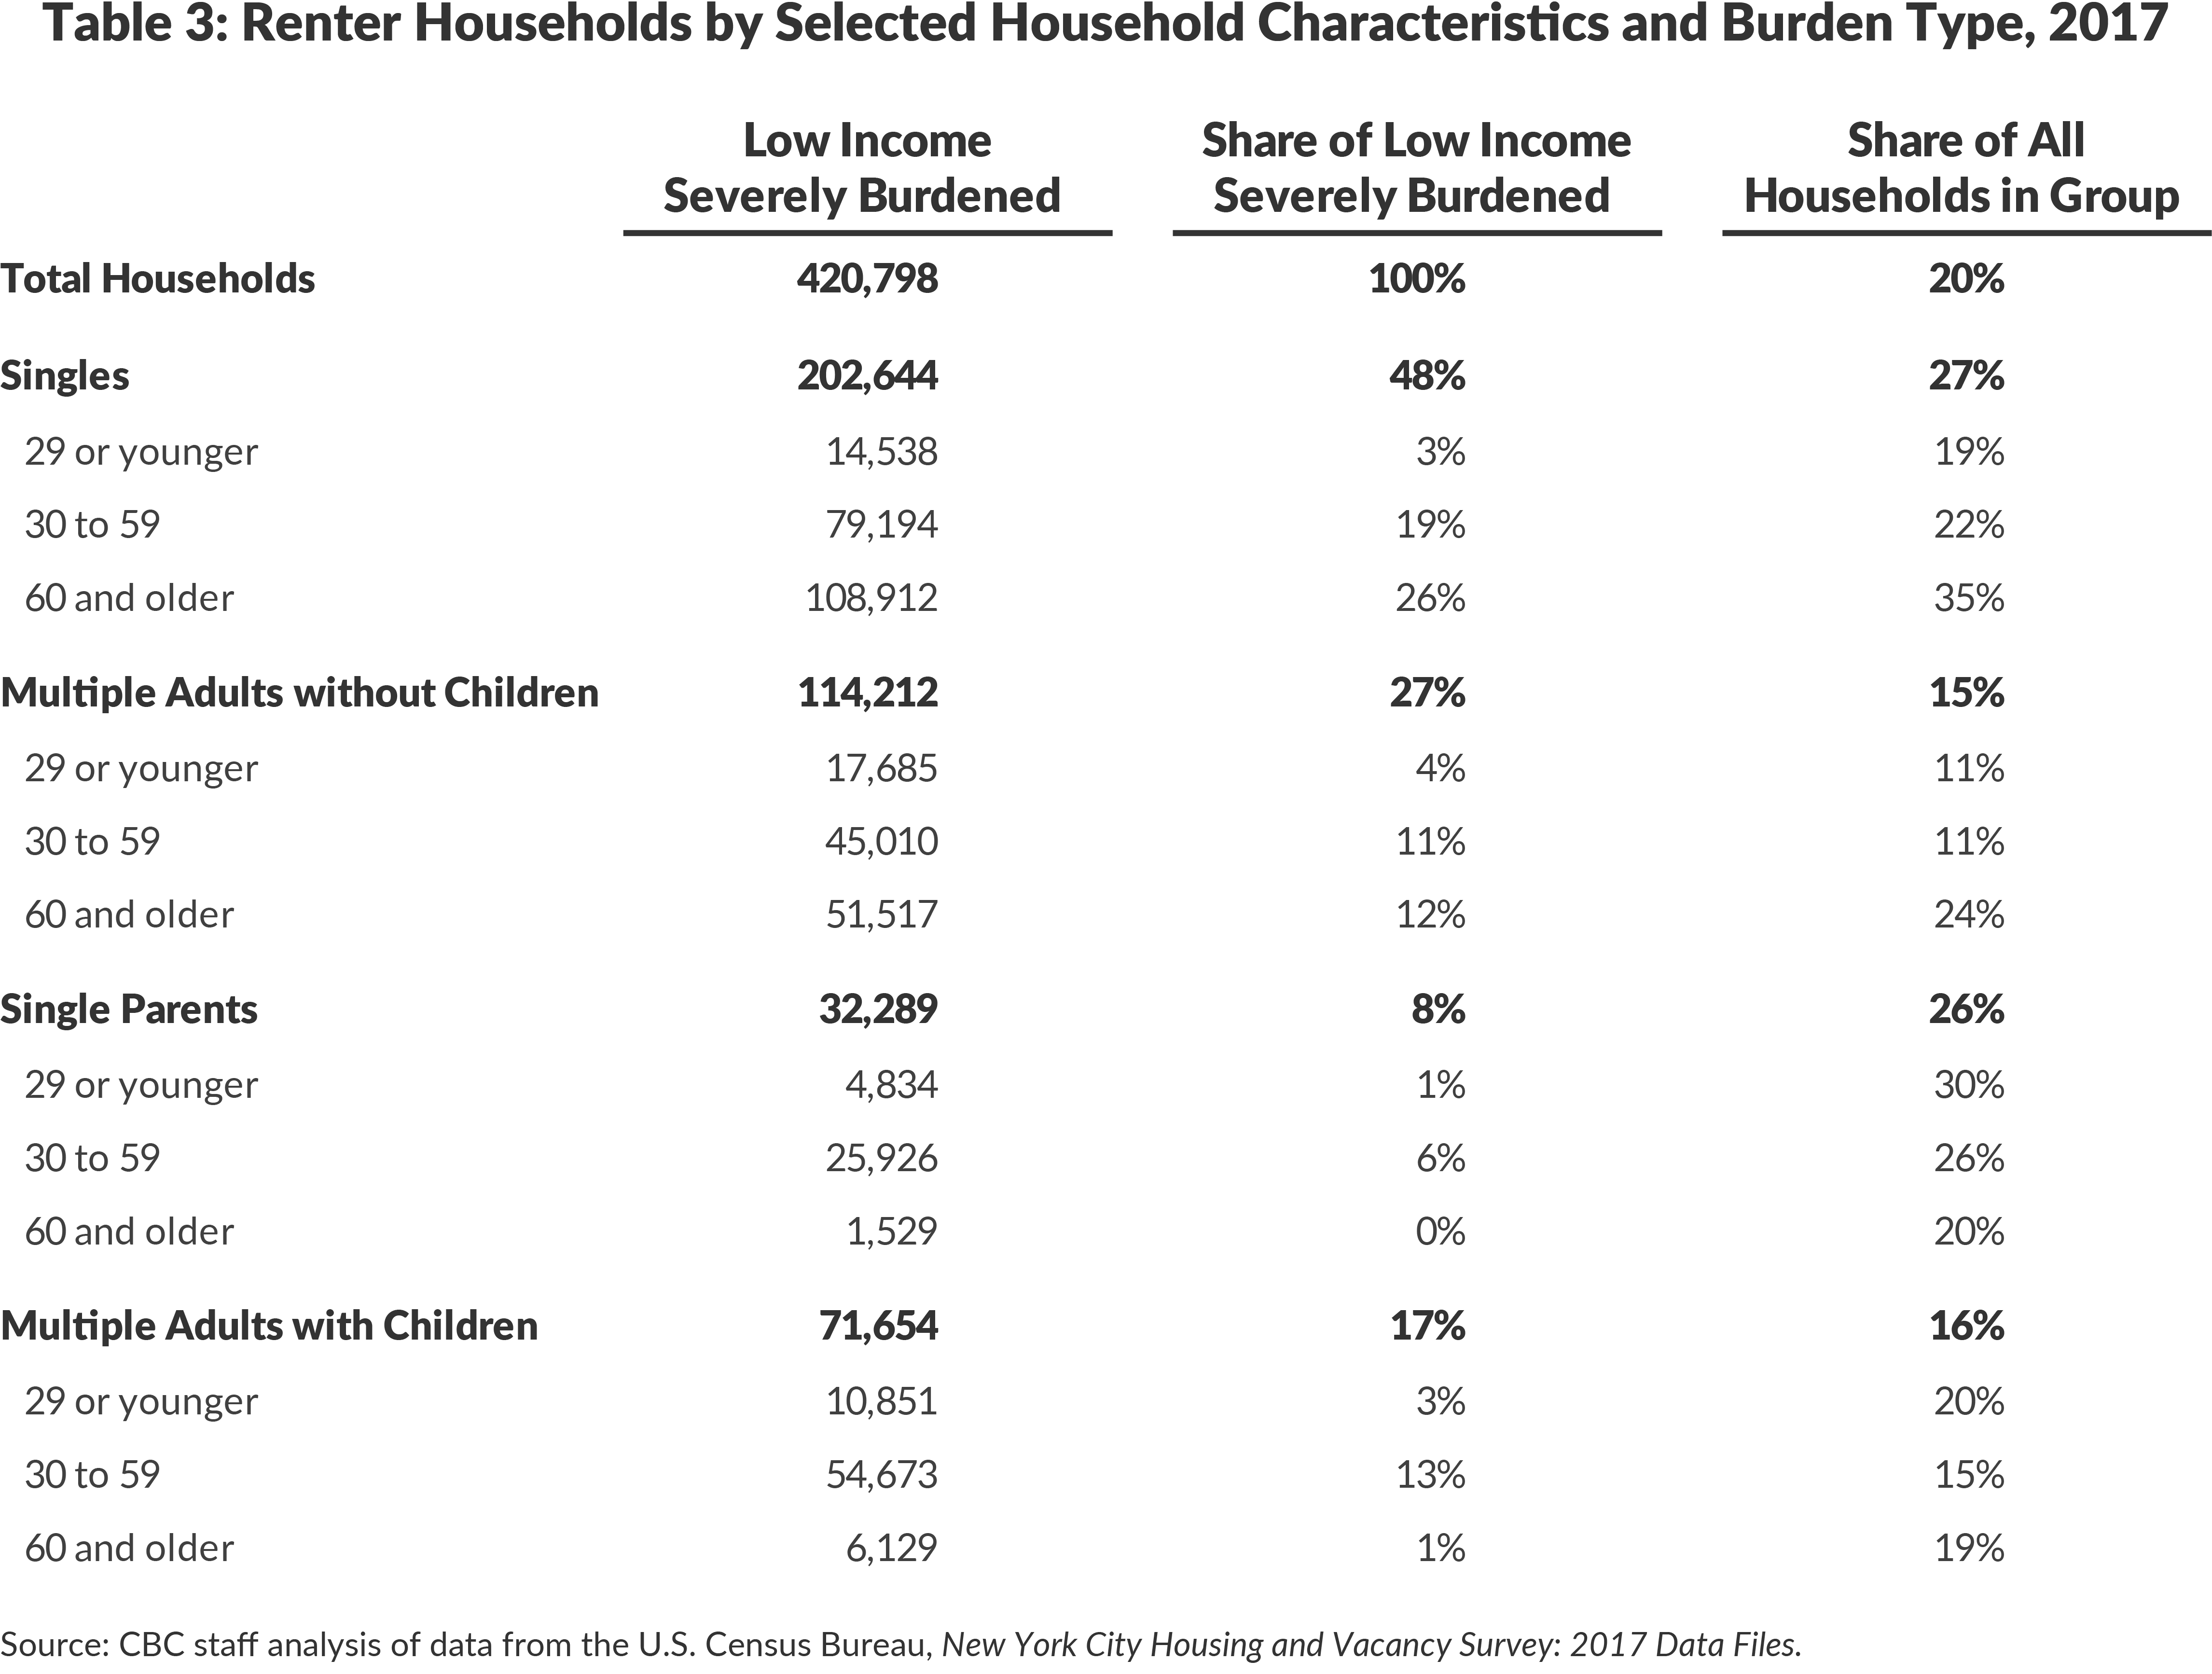 Table 3: Renter Households by Selected Household Characteristics and Burden Type, 2017